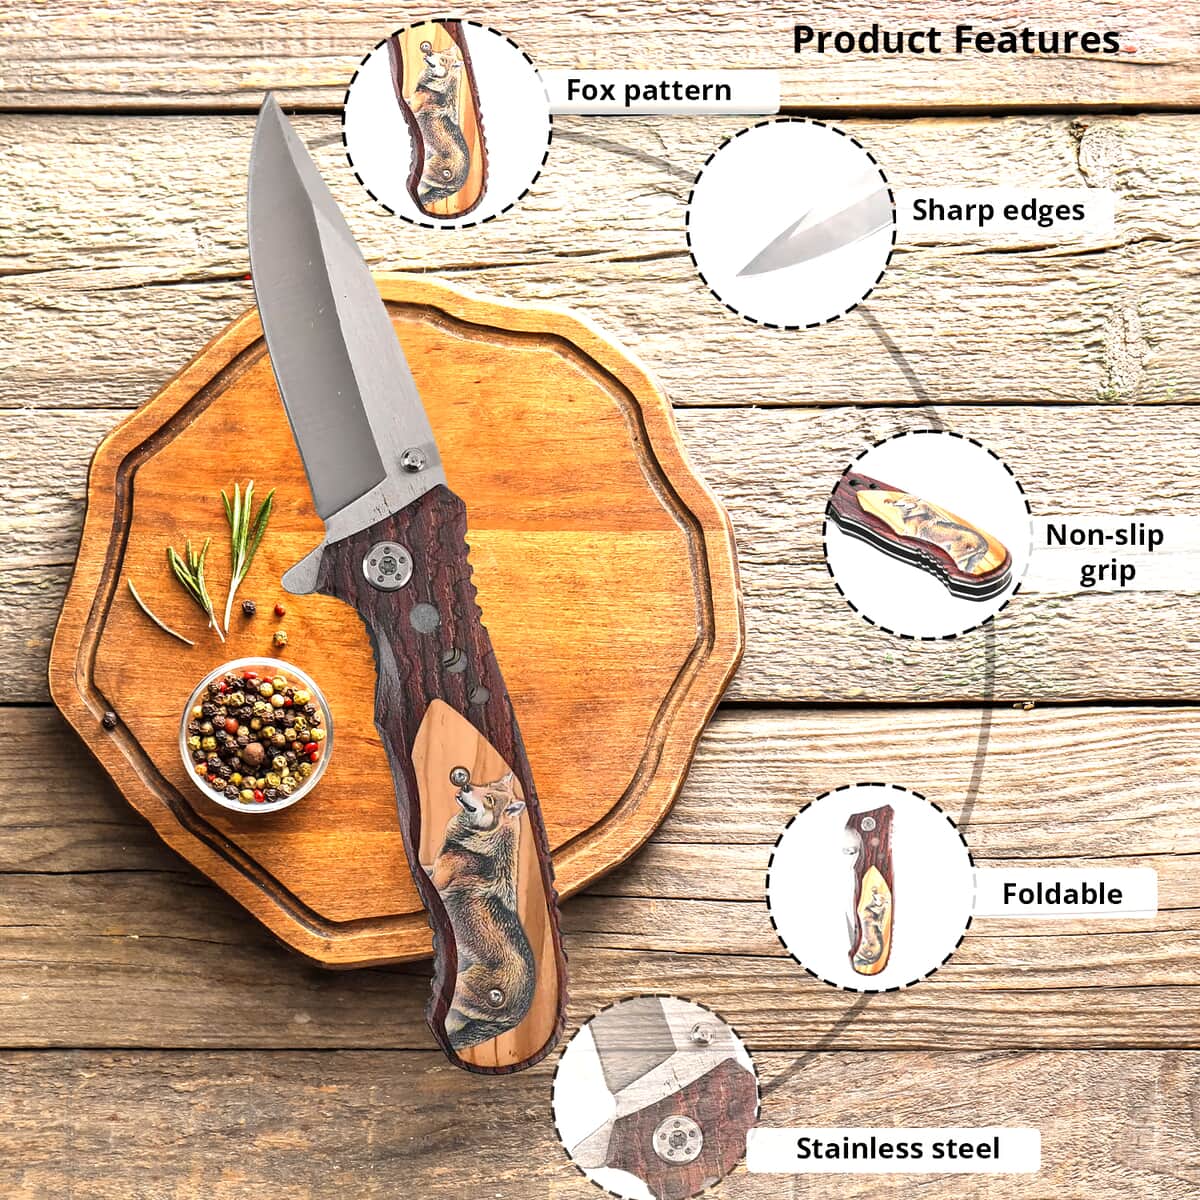 Brown Portable Folding Fox Printed Pattern Stainless Steel Knife image number 1